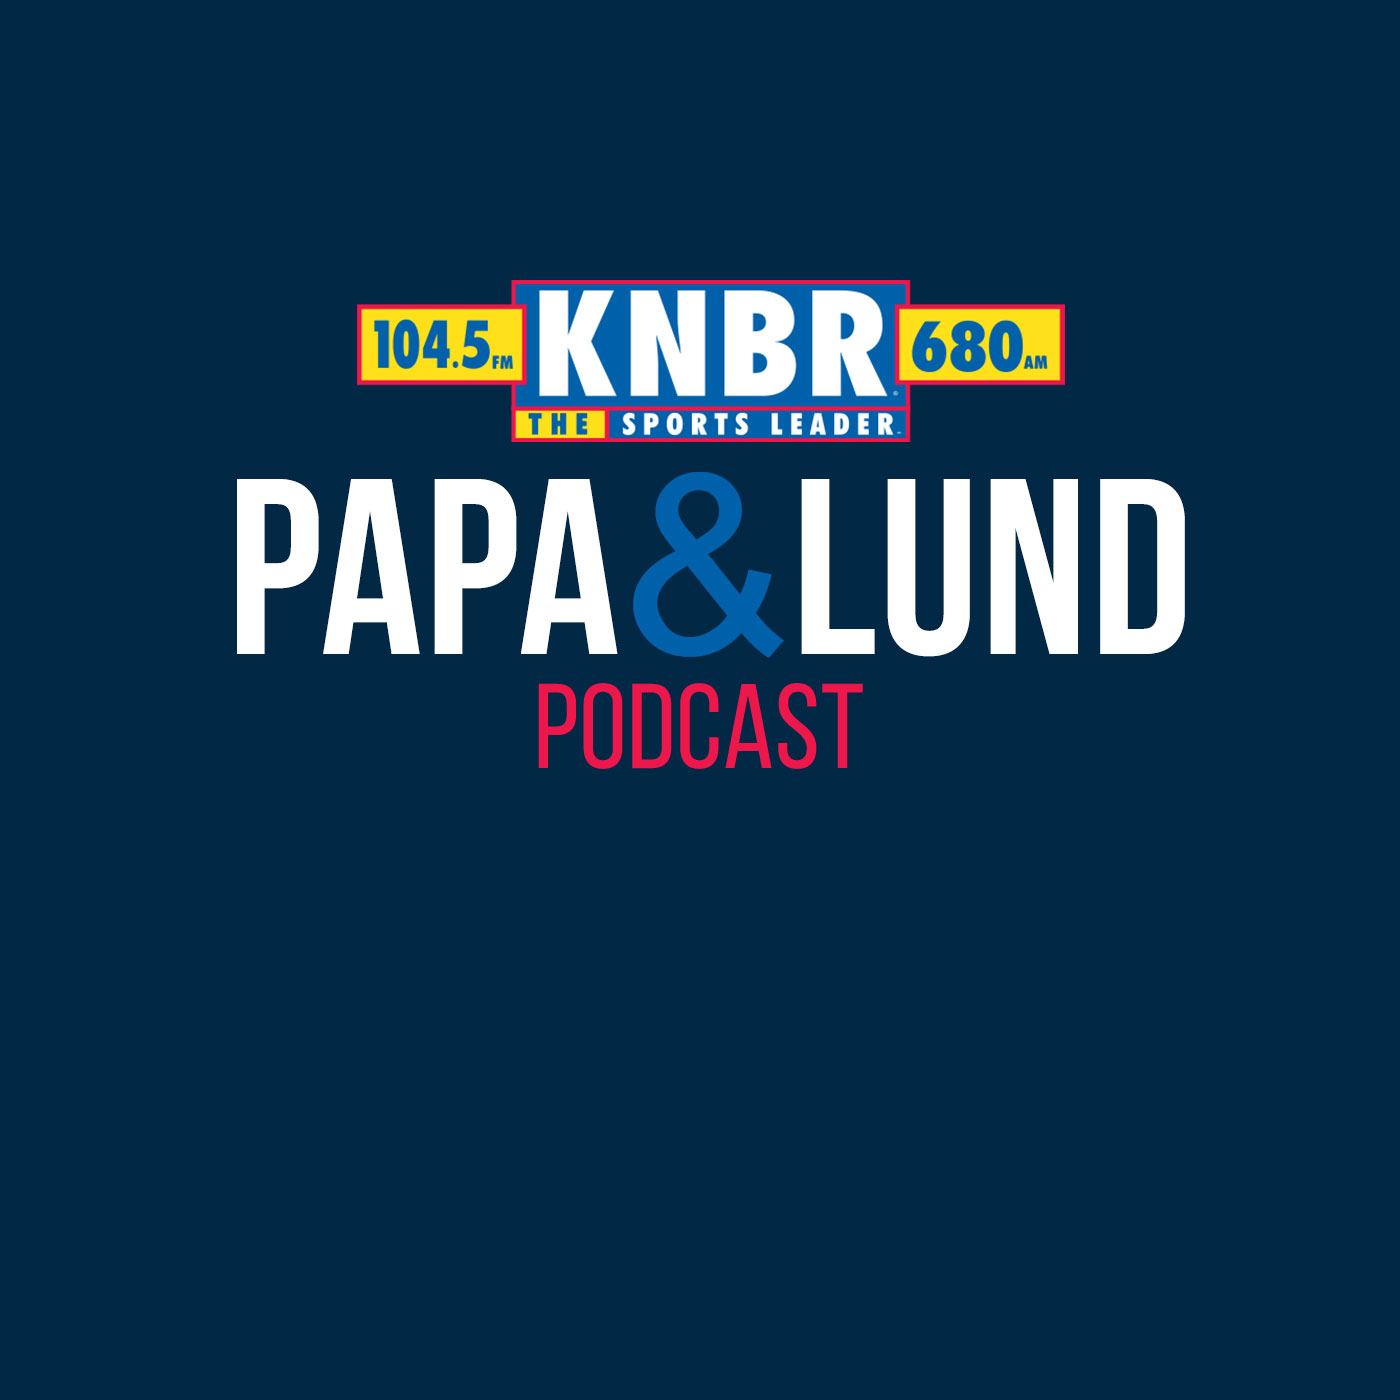 11-7 Marc Spears joins Papa & Lund to discuss the Warriors hot start on the road as the head into the Mile High City to take on the Defending NBA Champions